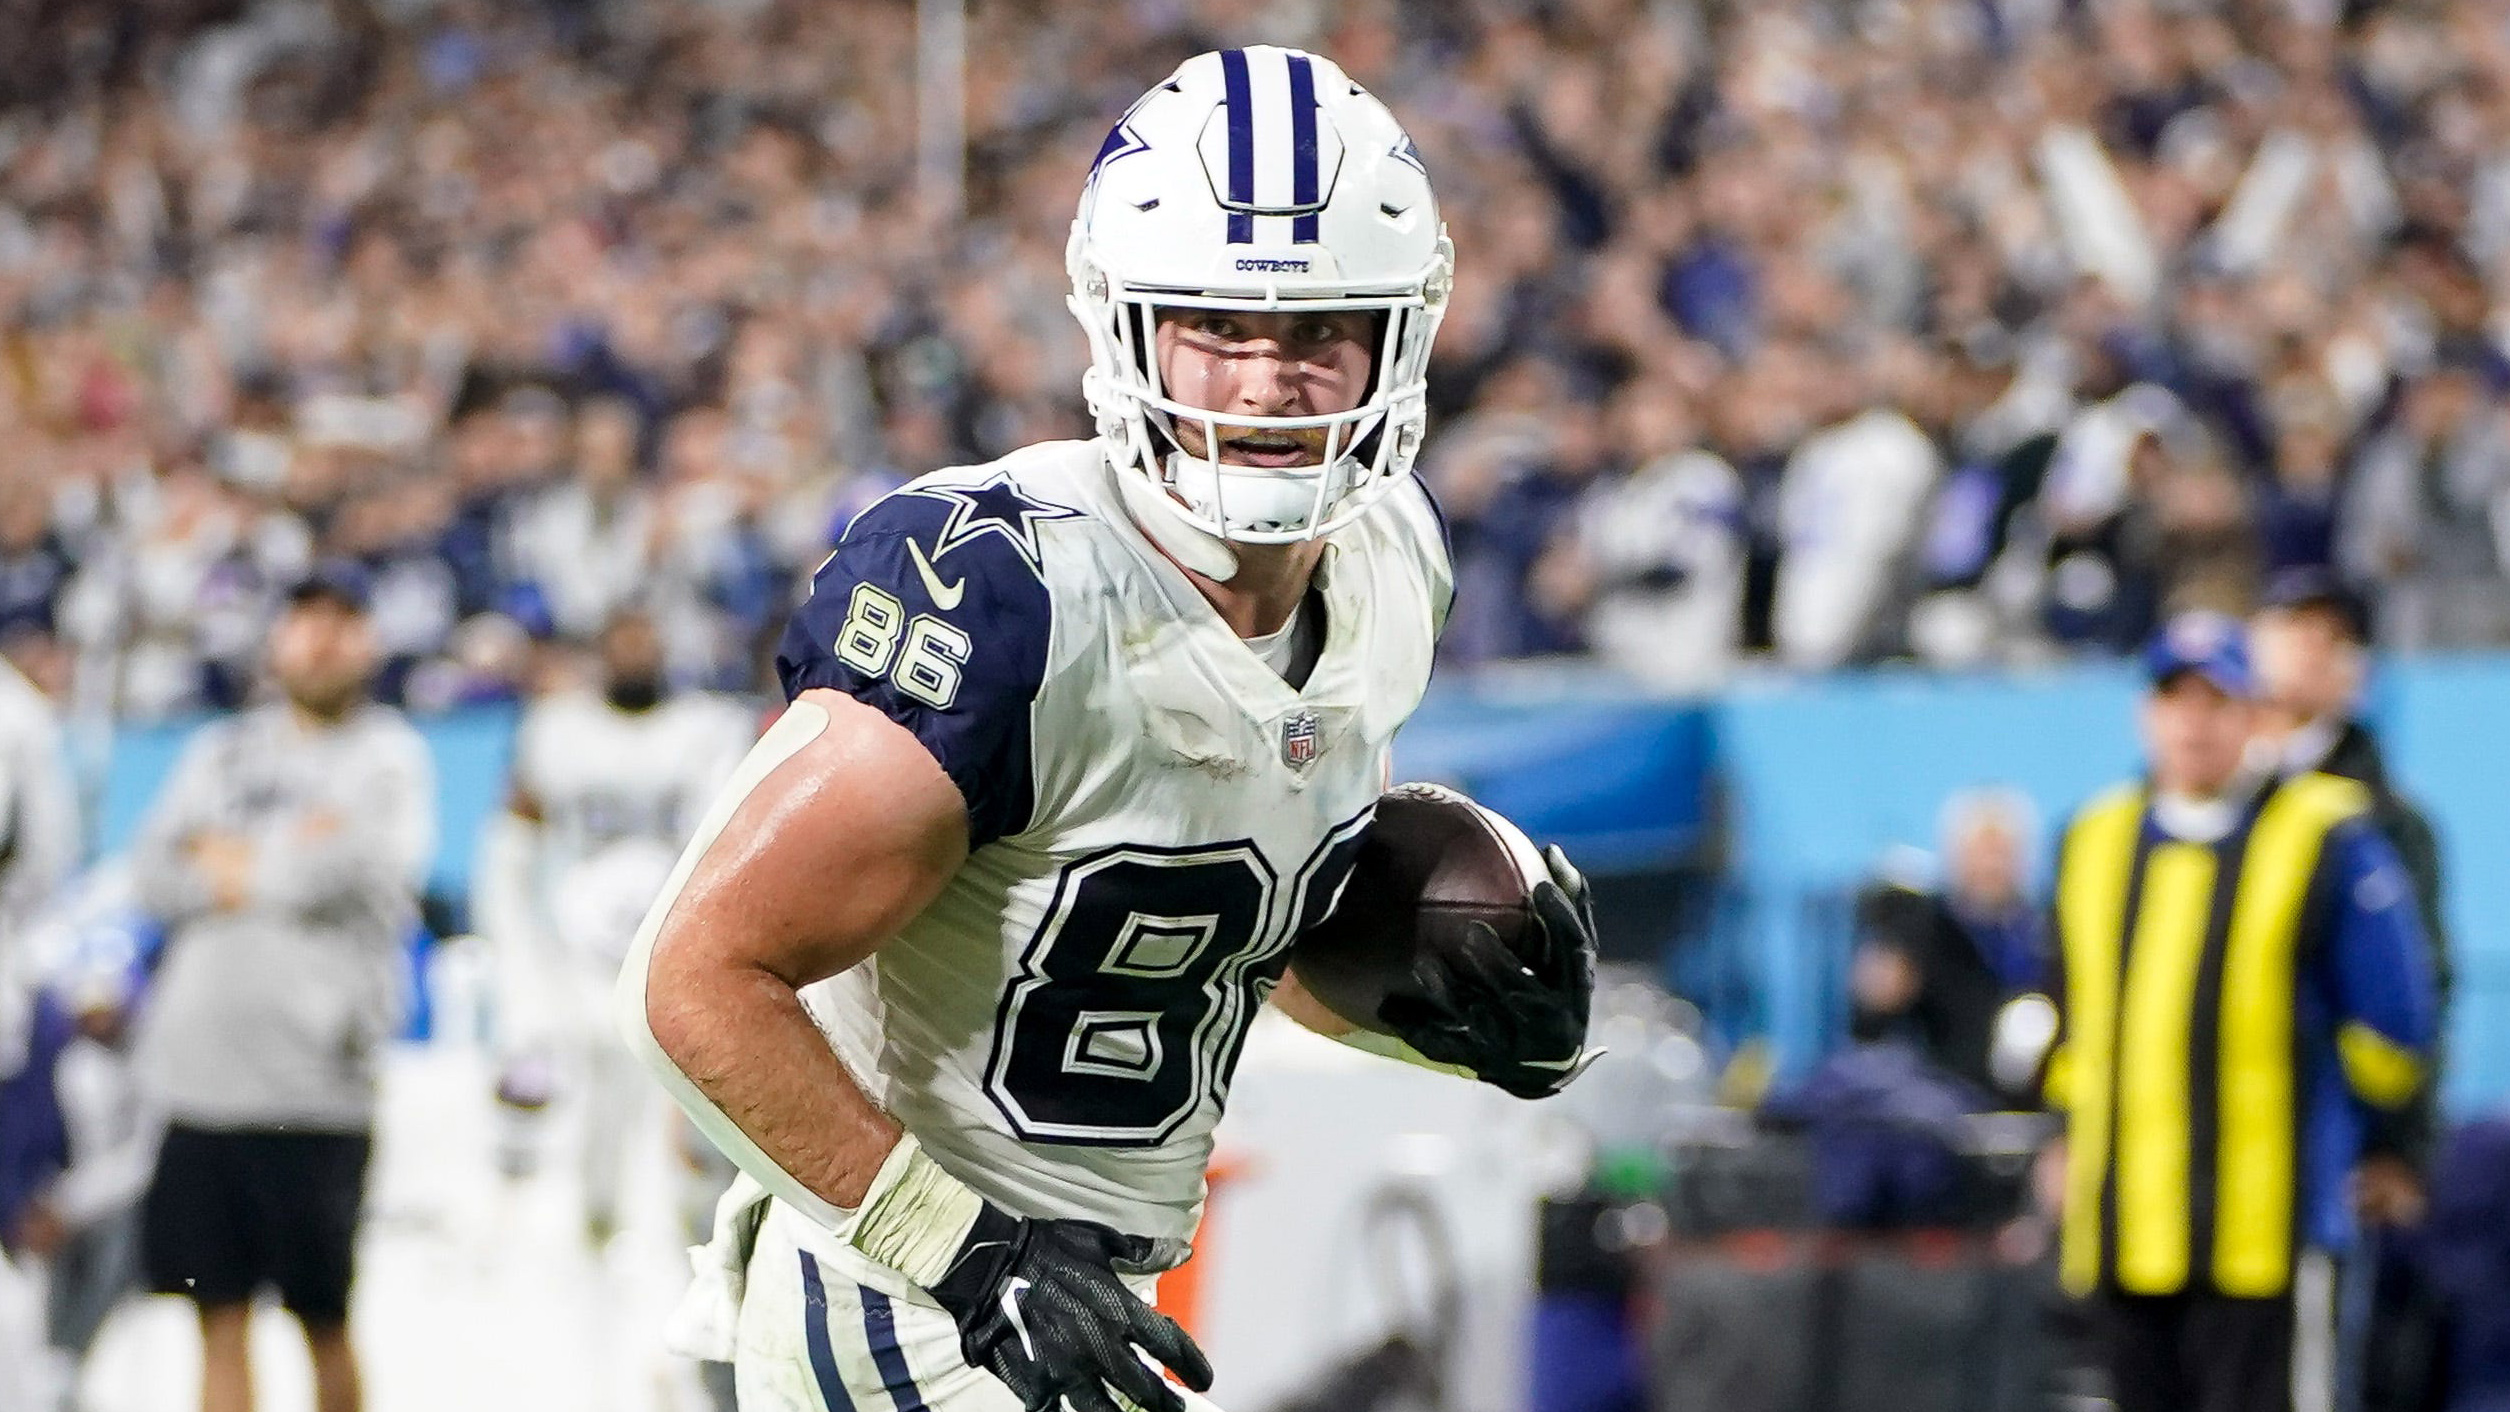 PFF ranks Dalton Schultz within top 10 of NFL tight ends